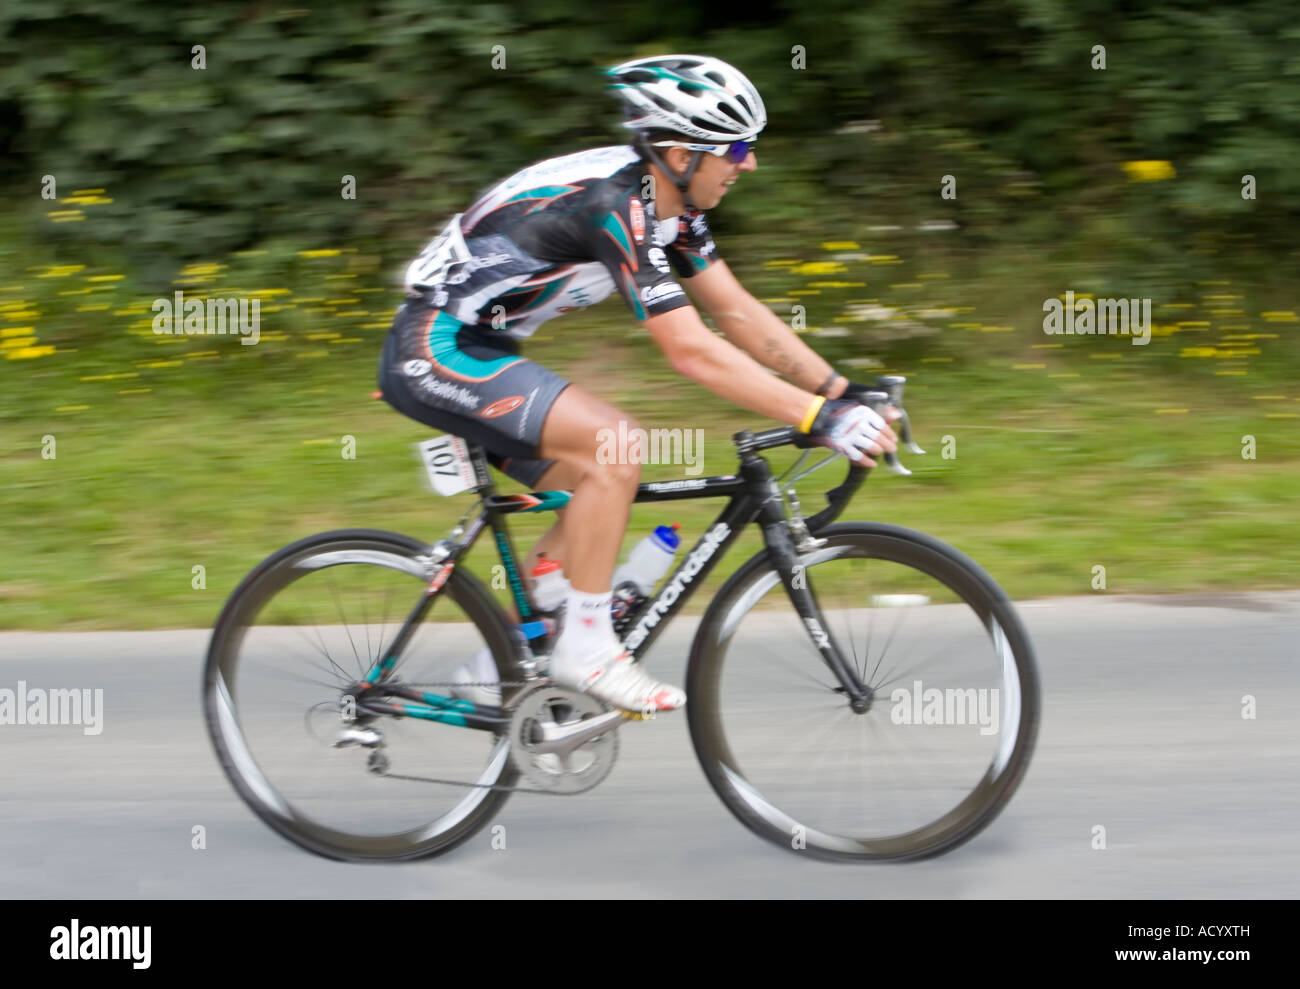 Russell Downing in British National Road Race Championship Abergavenny Wales UK Foto Stock